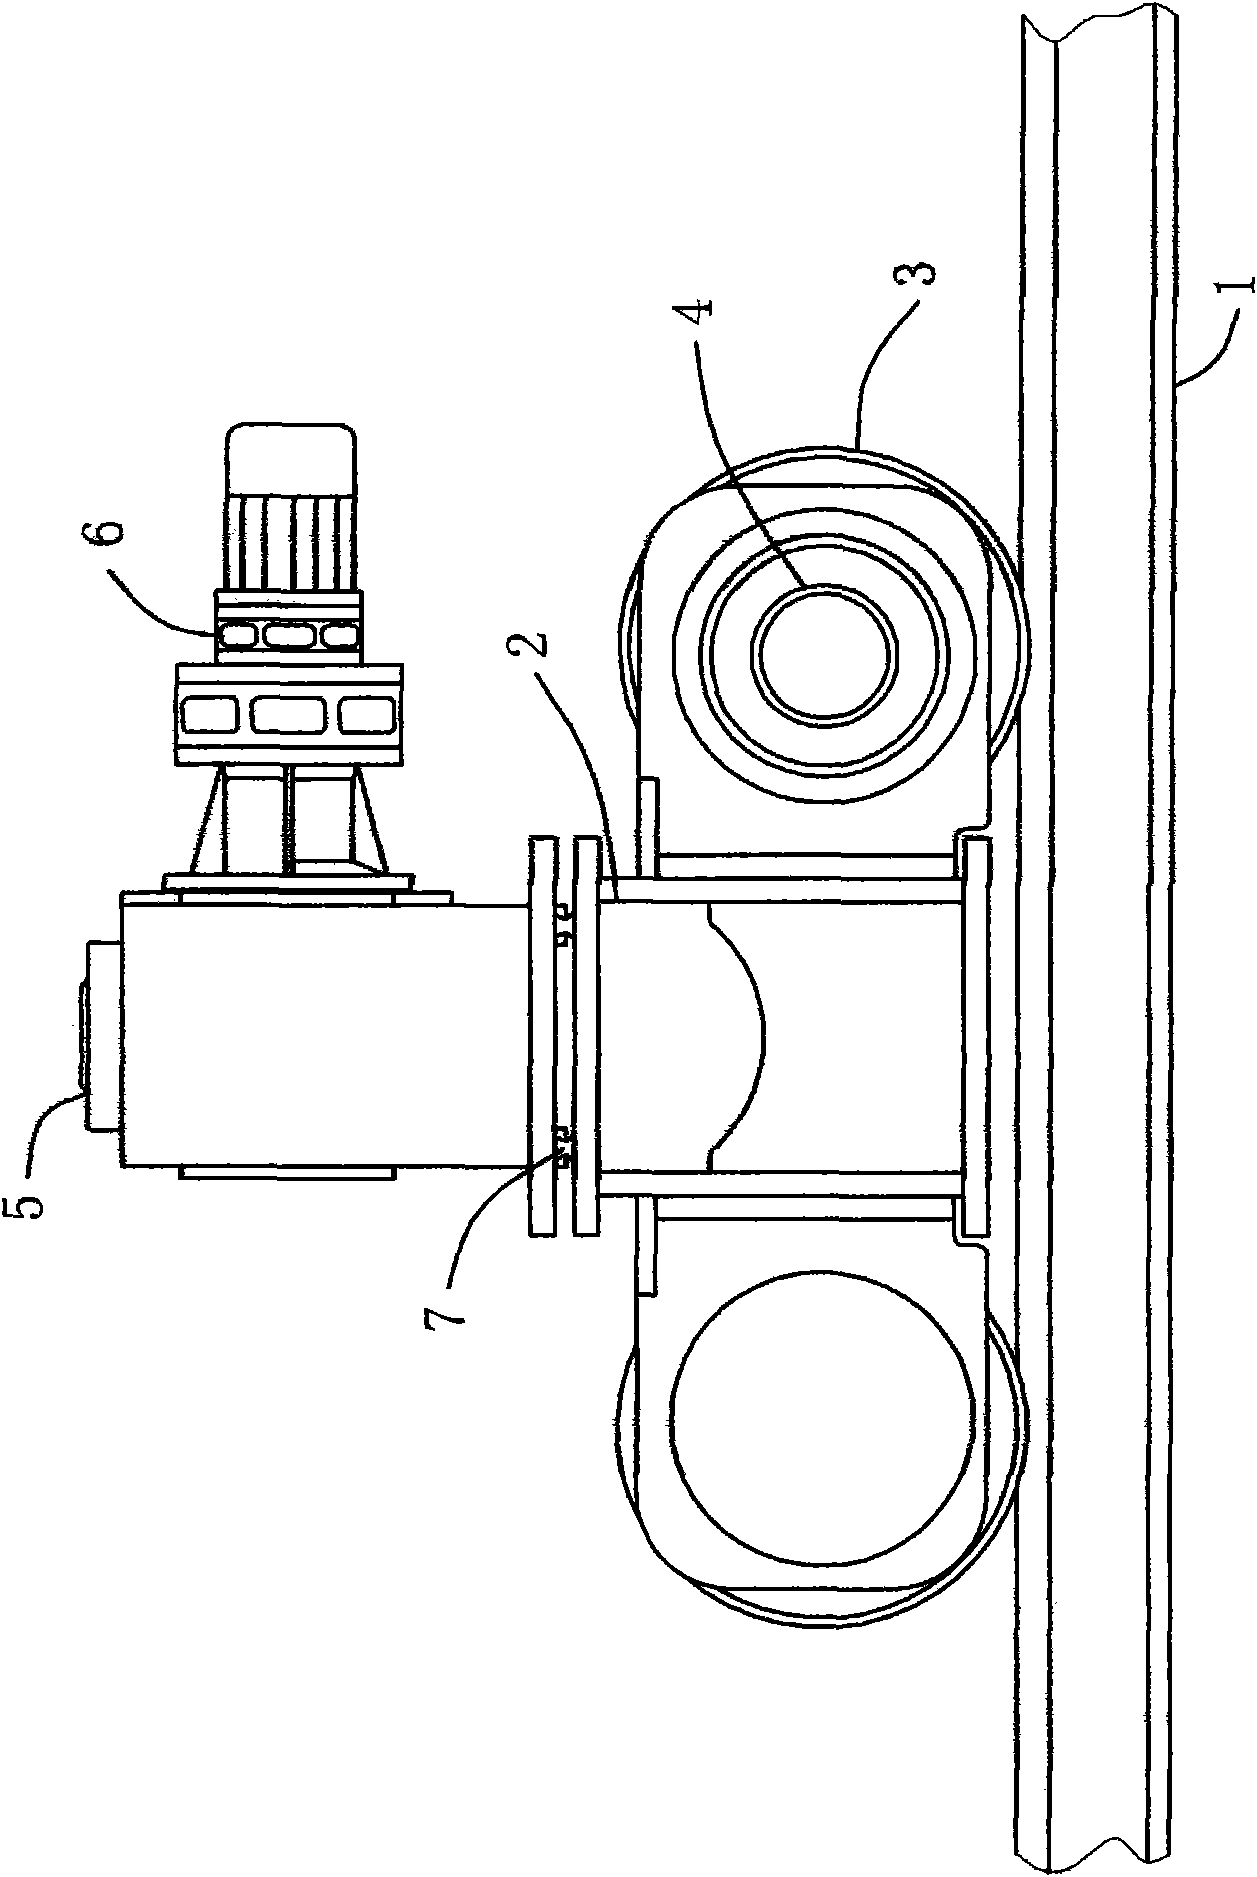 Shell ring assembly device for assembly of tower body of wind power generation iron tower